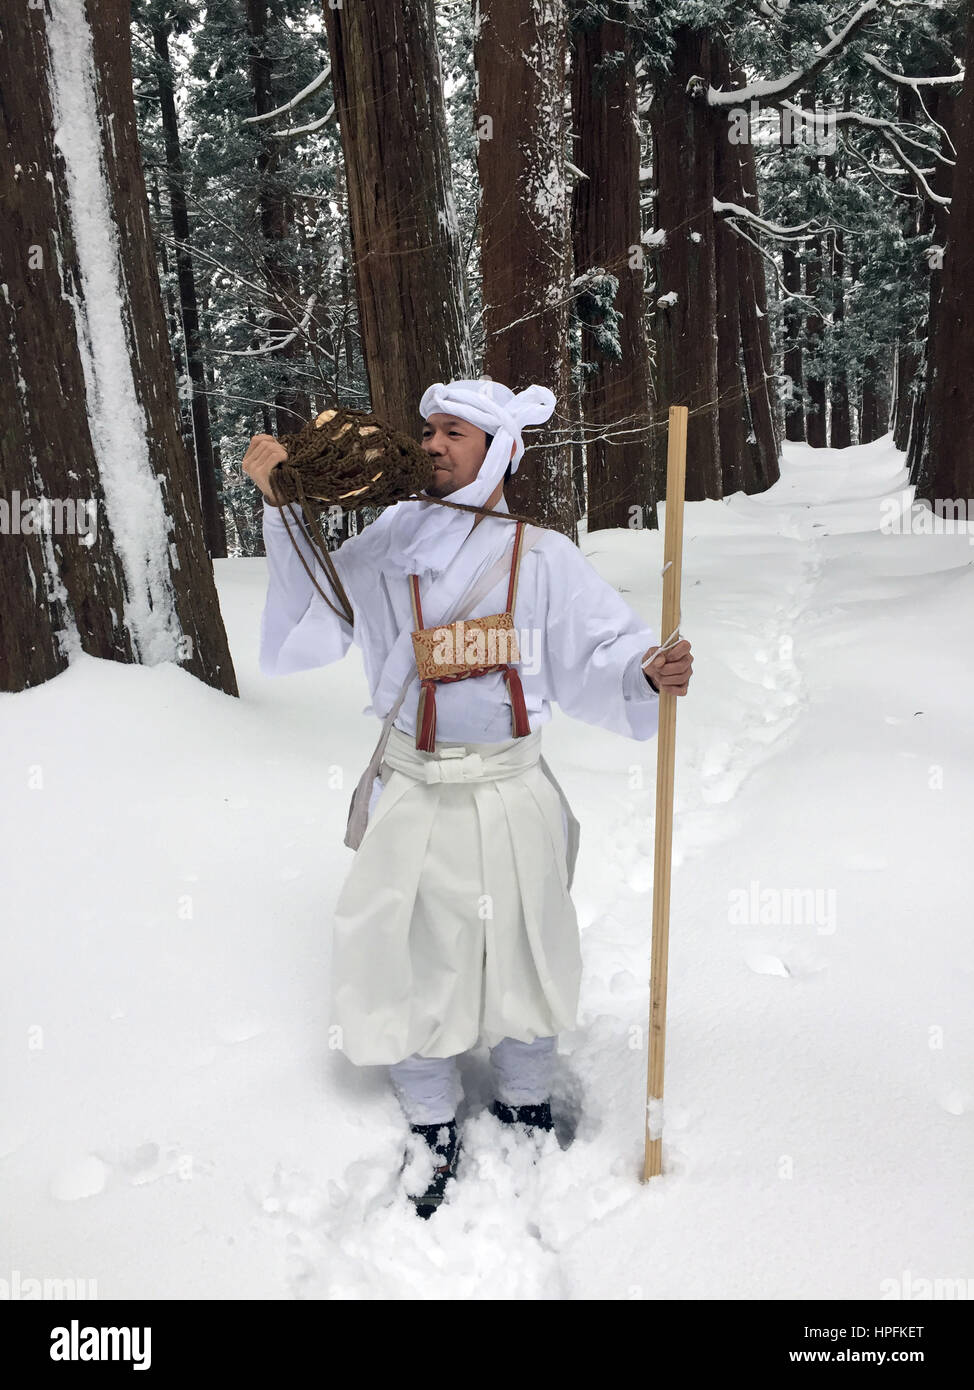 The Japanese Yamabushi mountain ascetic Takehiro Miura blows a conch shell horn in a snow-covered forest in the Yamagata Province, Japan, 15 February 2017. Monks and members of the laity have retreated into the mountains in the area to live a life immersed in ascetic rituals and prayer for some 1300 years. Photo: Lars Nicolaysen/dpa Stock Photo